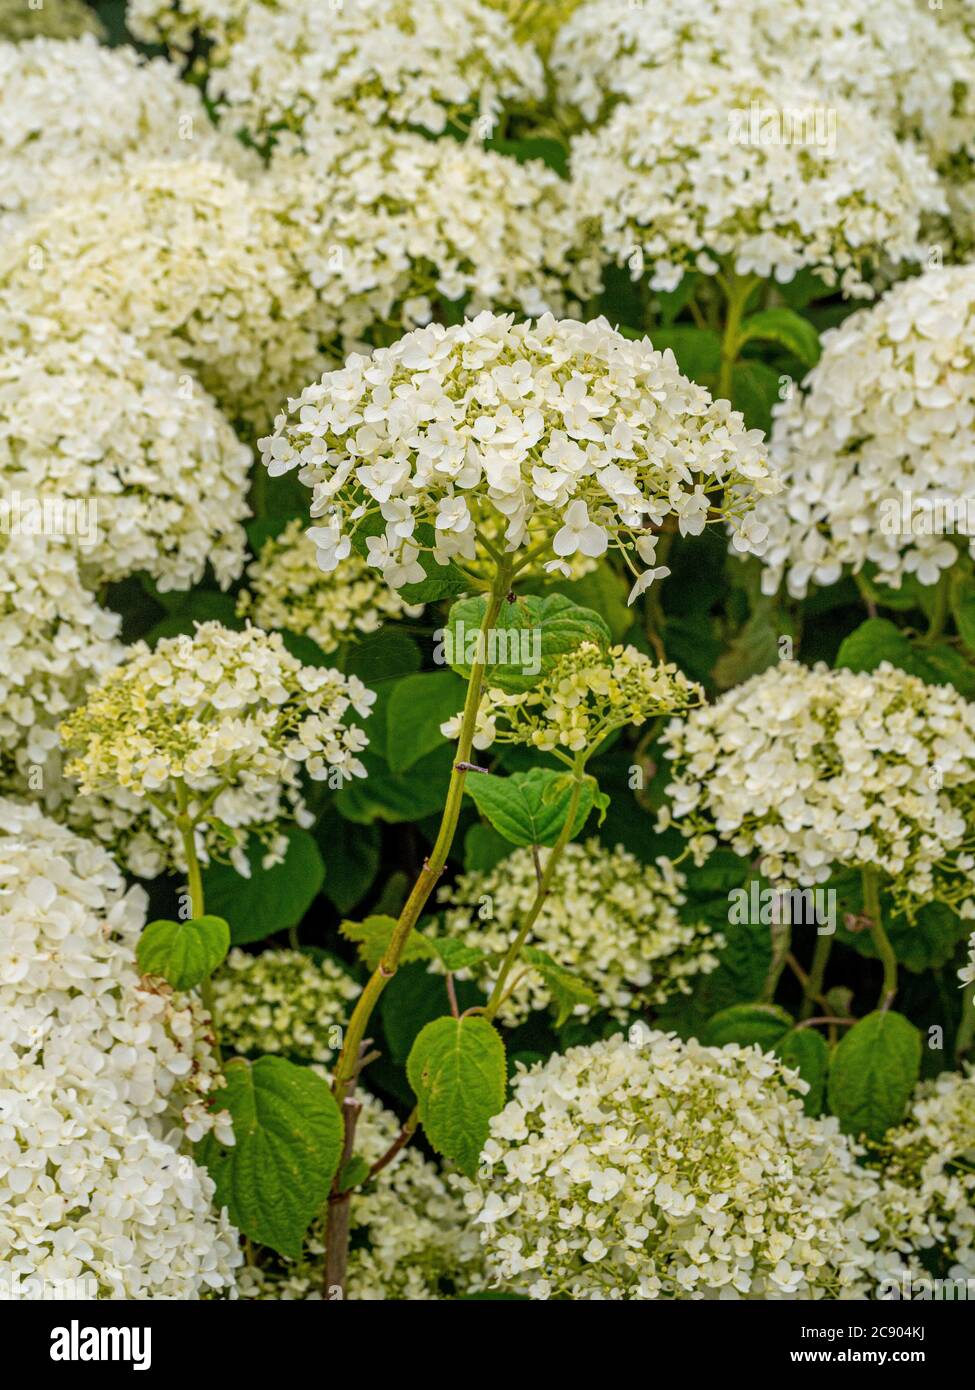 Close up of the white flowerheads of Hydrangea arborescens 'Annabelle' growing in a garden. Stock Photo